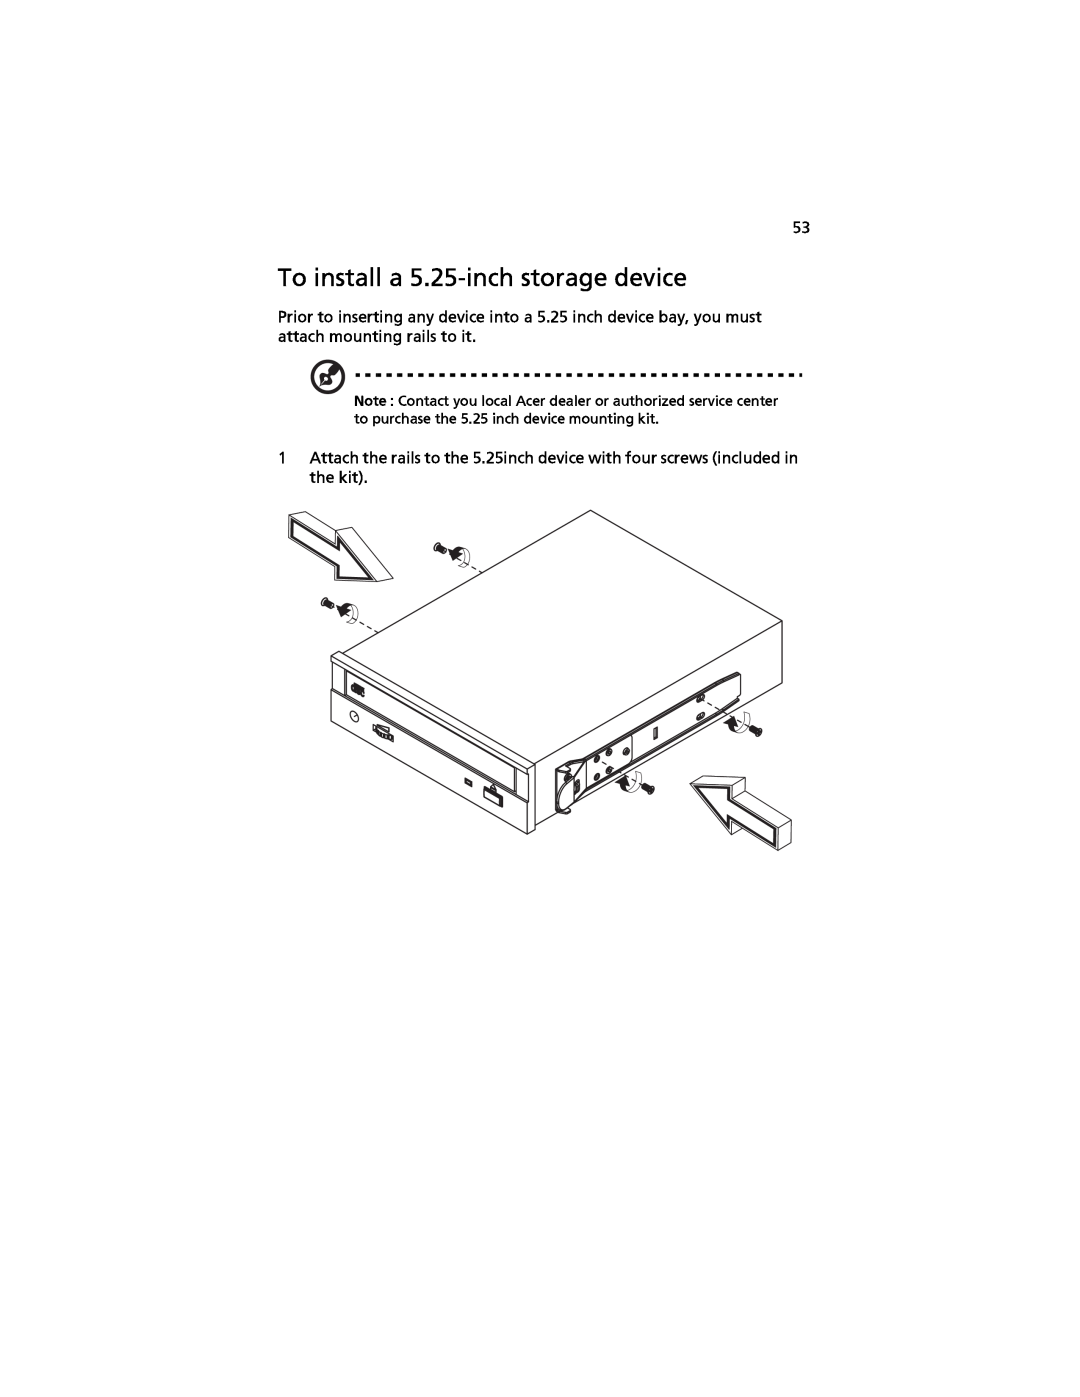 Acer G520 series manual To install a 5.25-inch storage device 